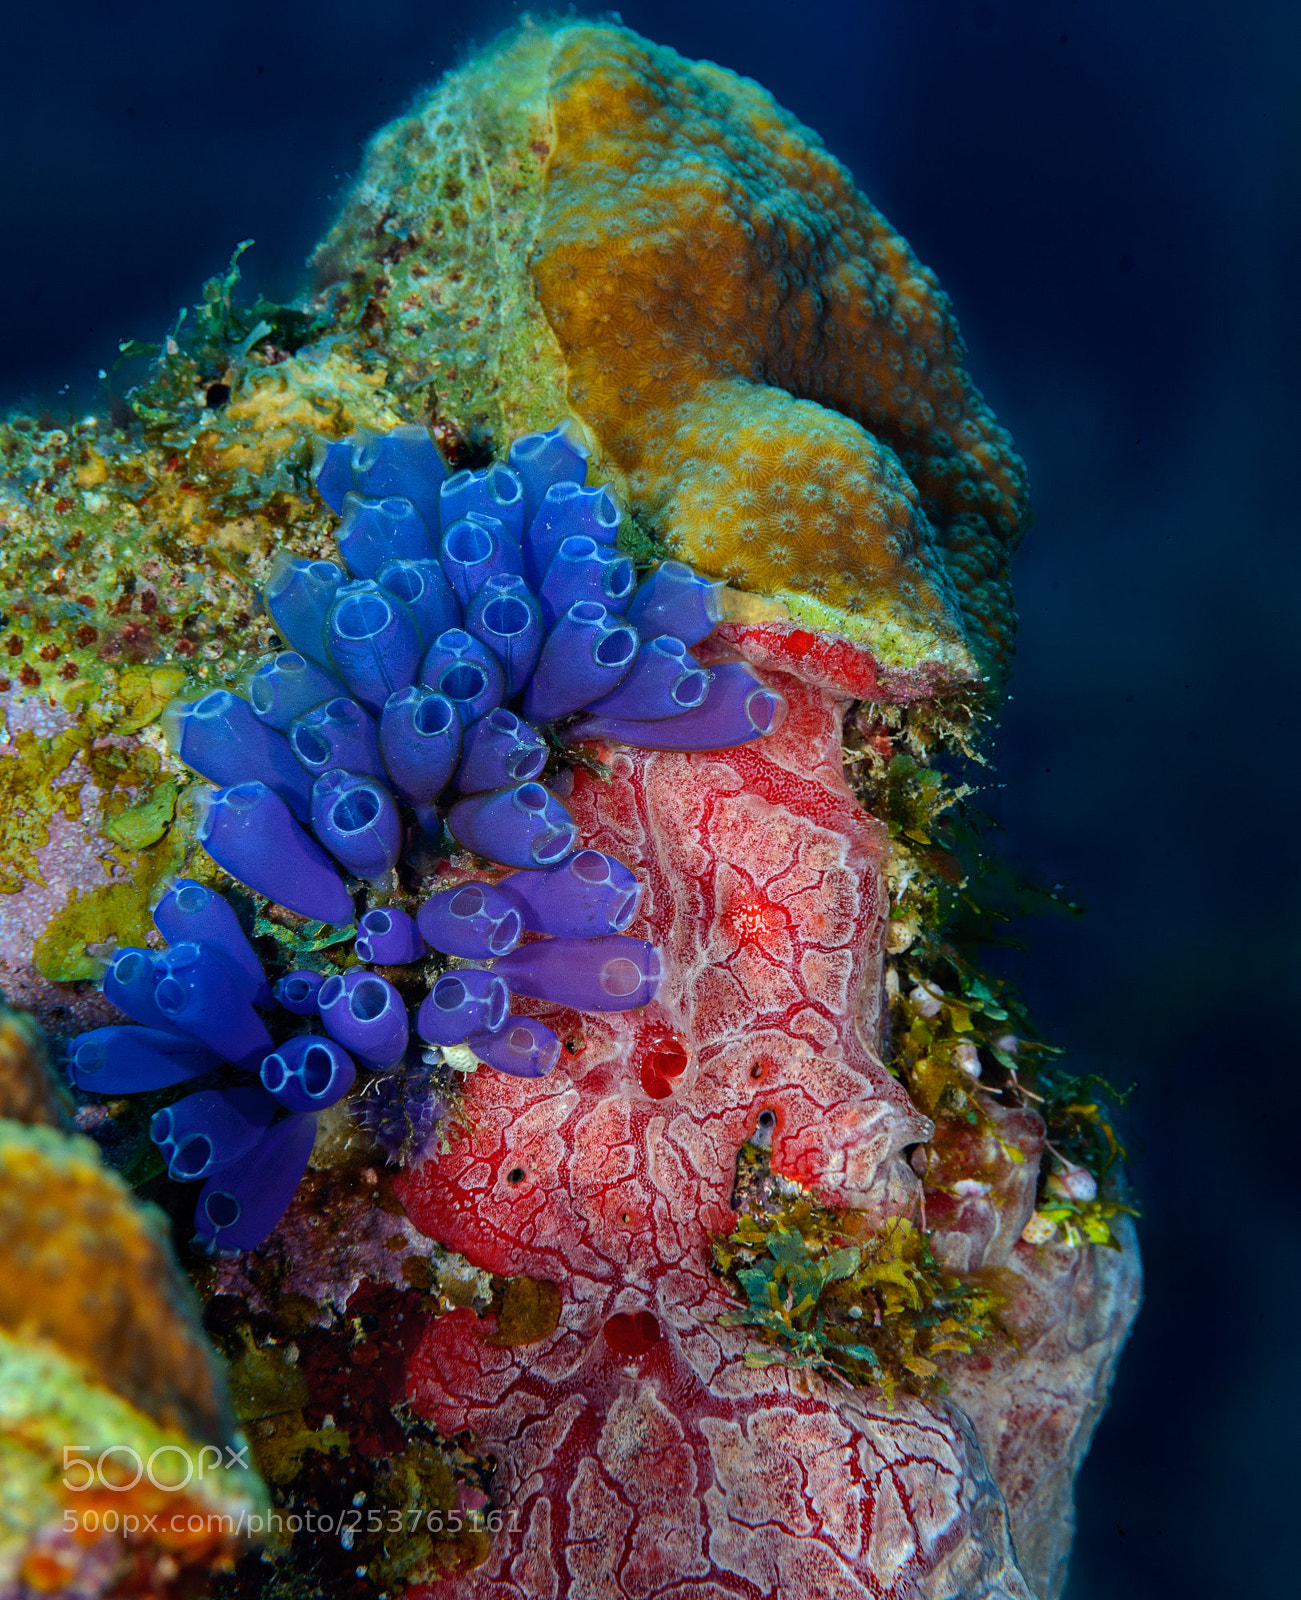 Nikon D800 sample photo. Blue bell tunicate and photography